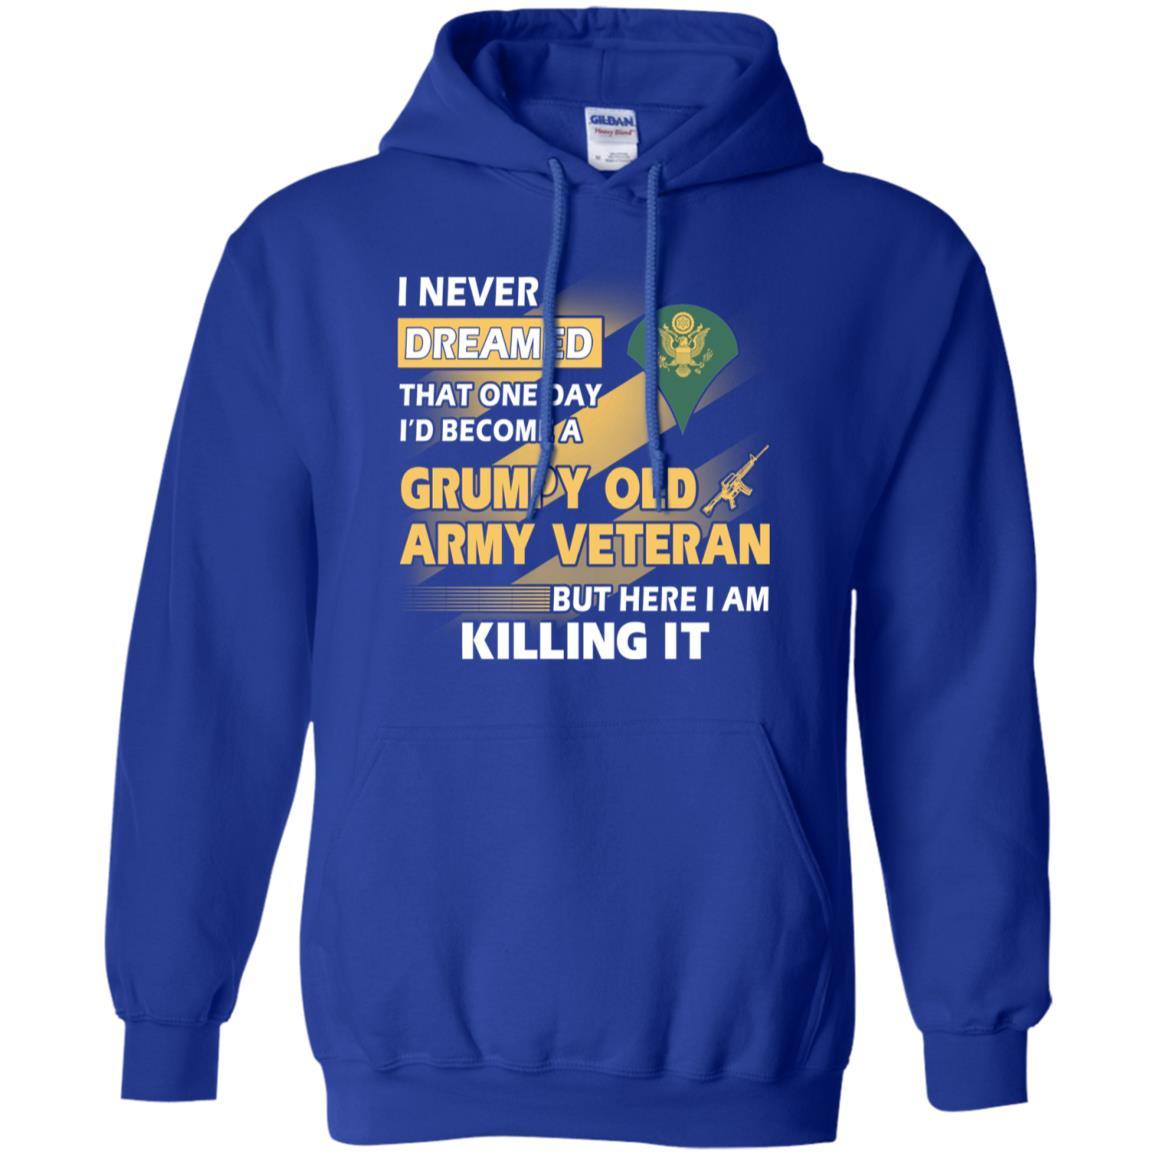 US Army T-Shirt "Grumpy Old Veteran" E-4 SPC(SP4) On Front-TShirt-Army-Veterans Nation